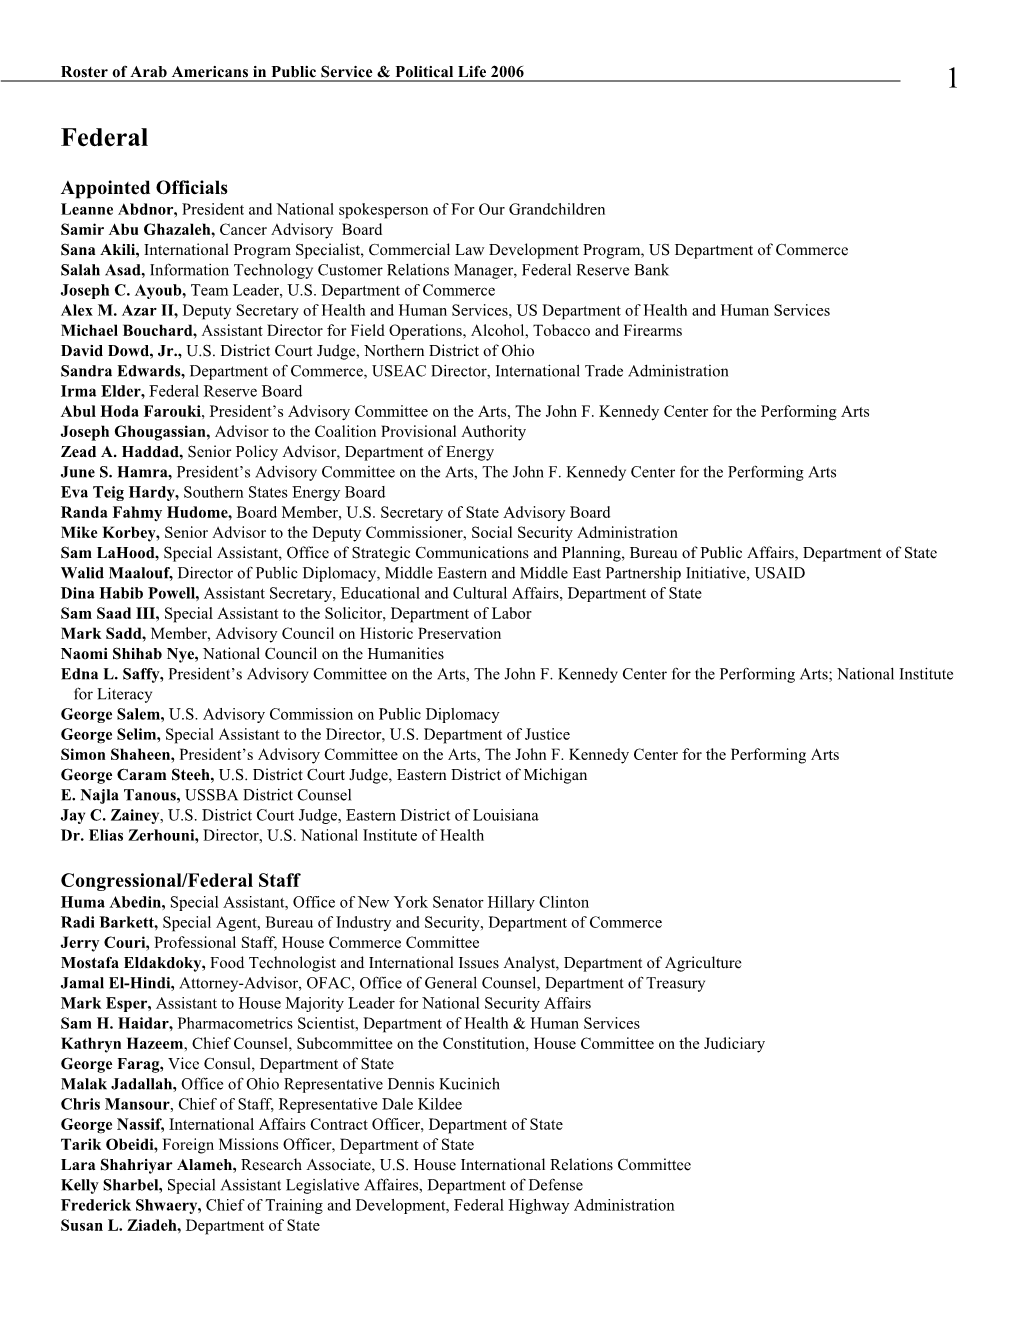 2006 Roster of Arab Americans in Public Service